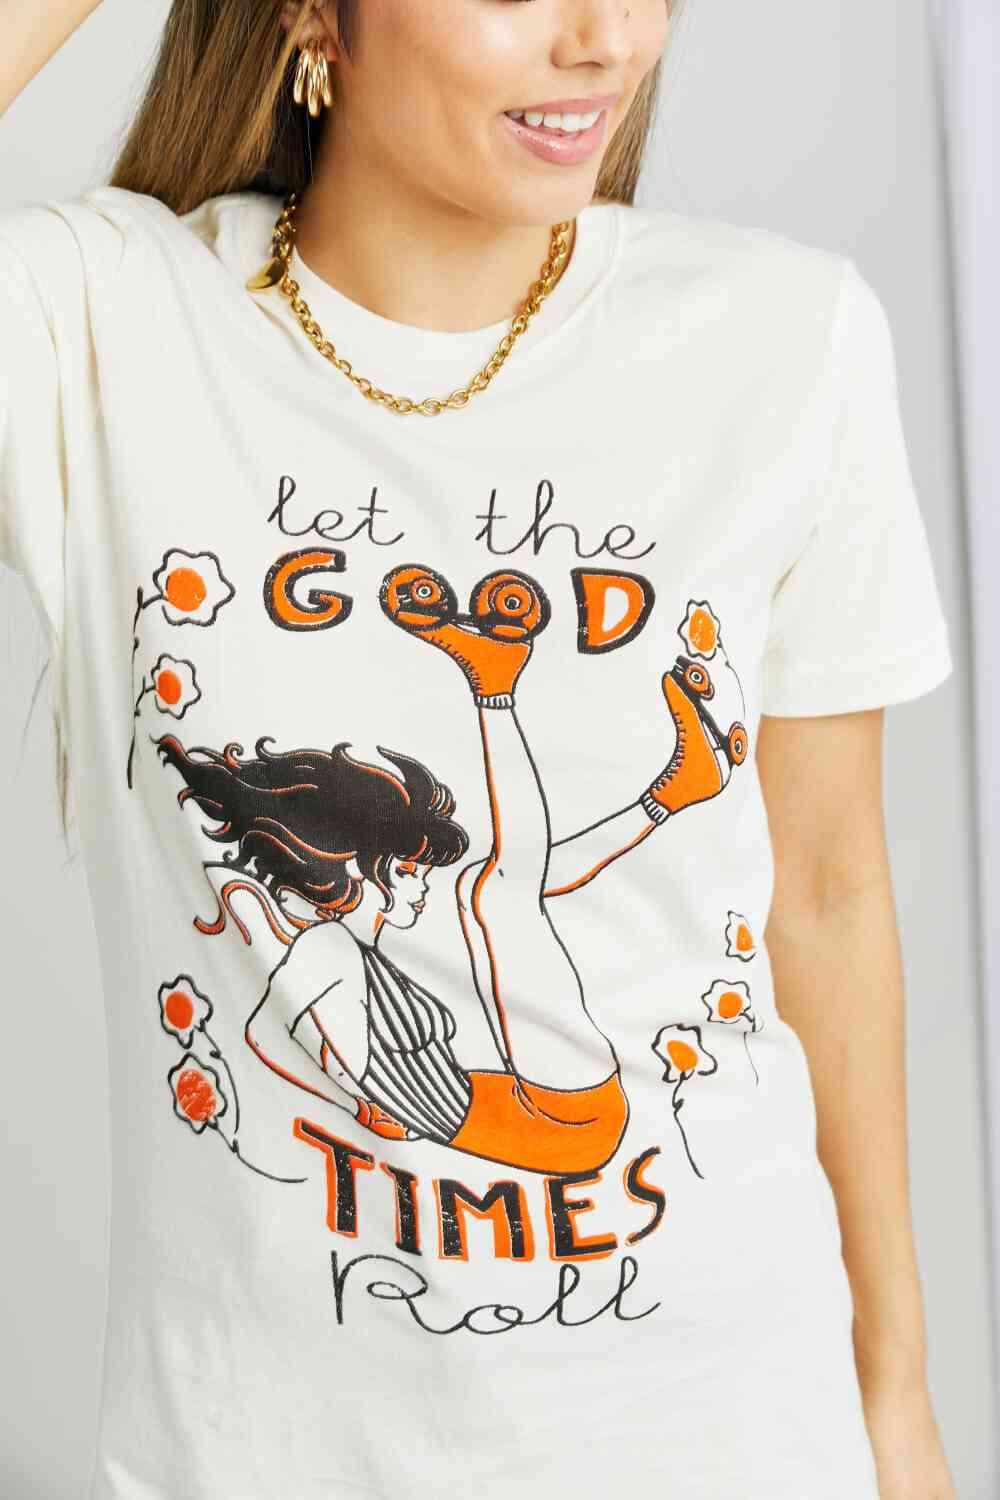 mineB Full Size LET THE GOOD TIMES ROLL Graphic Tee - Closet of Ren